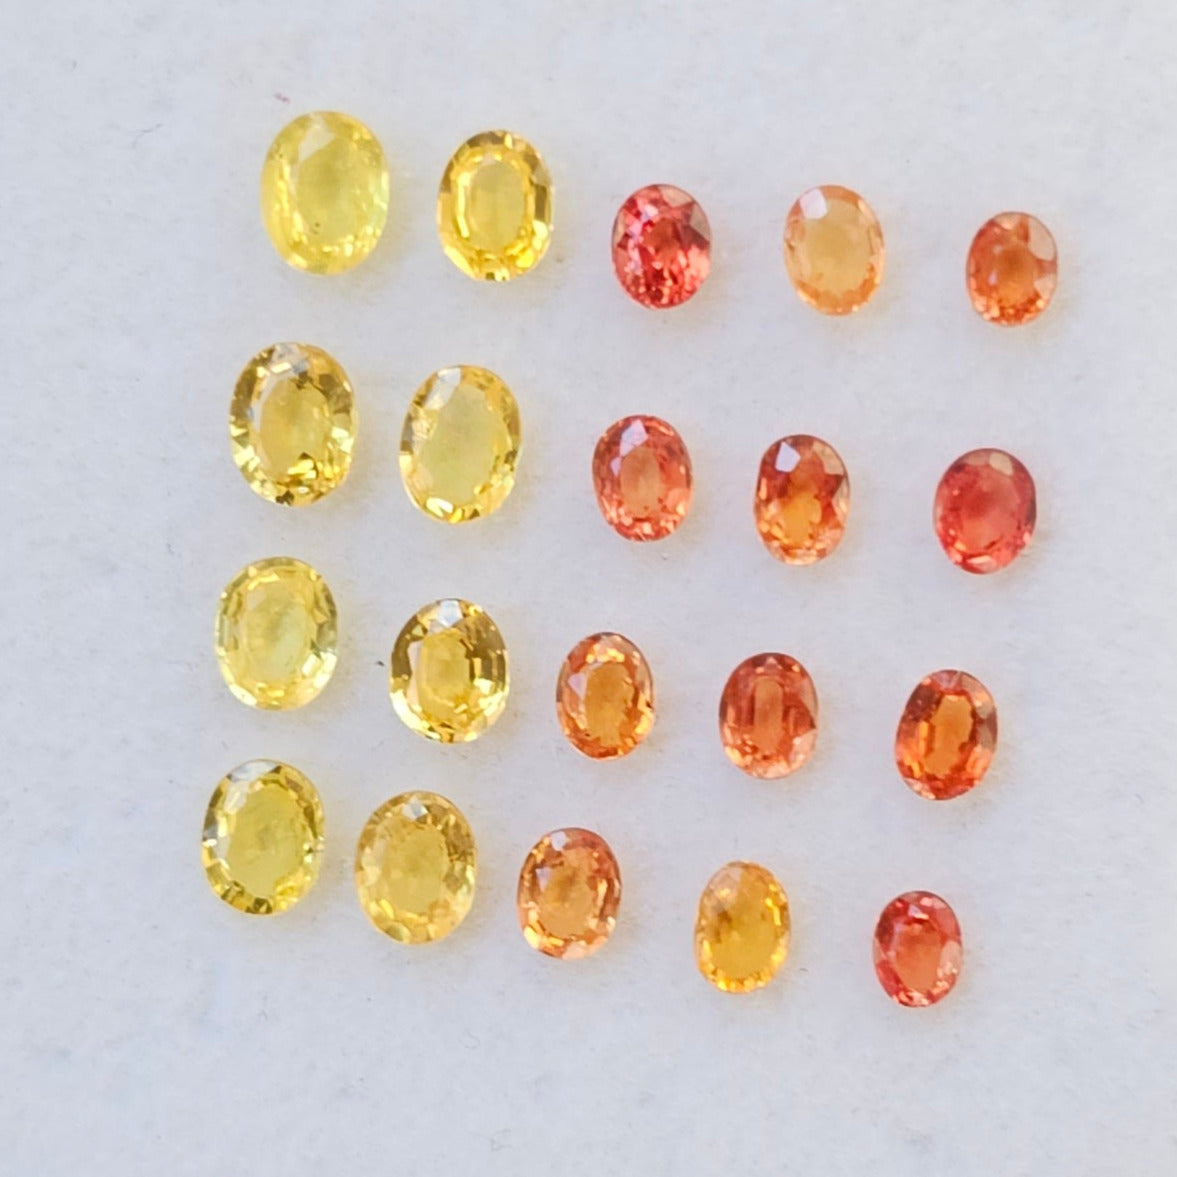 20 Pieces Natural Multi Sapphire Faceted Gemstones Oval Shape, 3-4mm - The LabradoriteKing